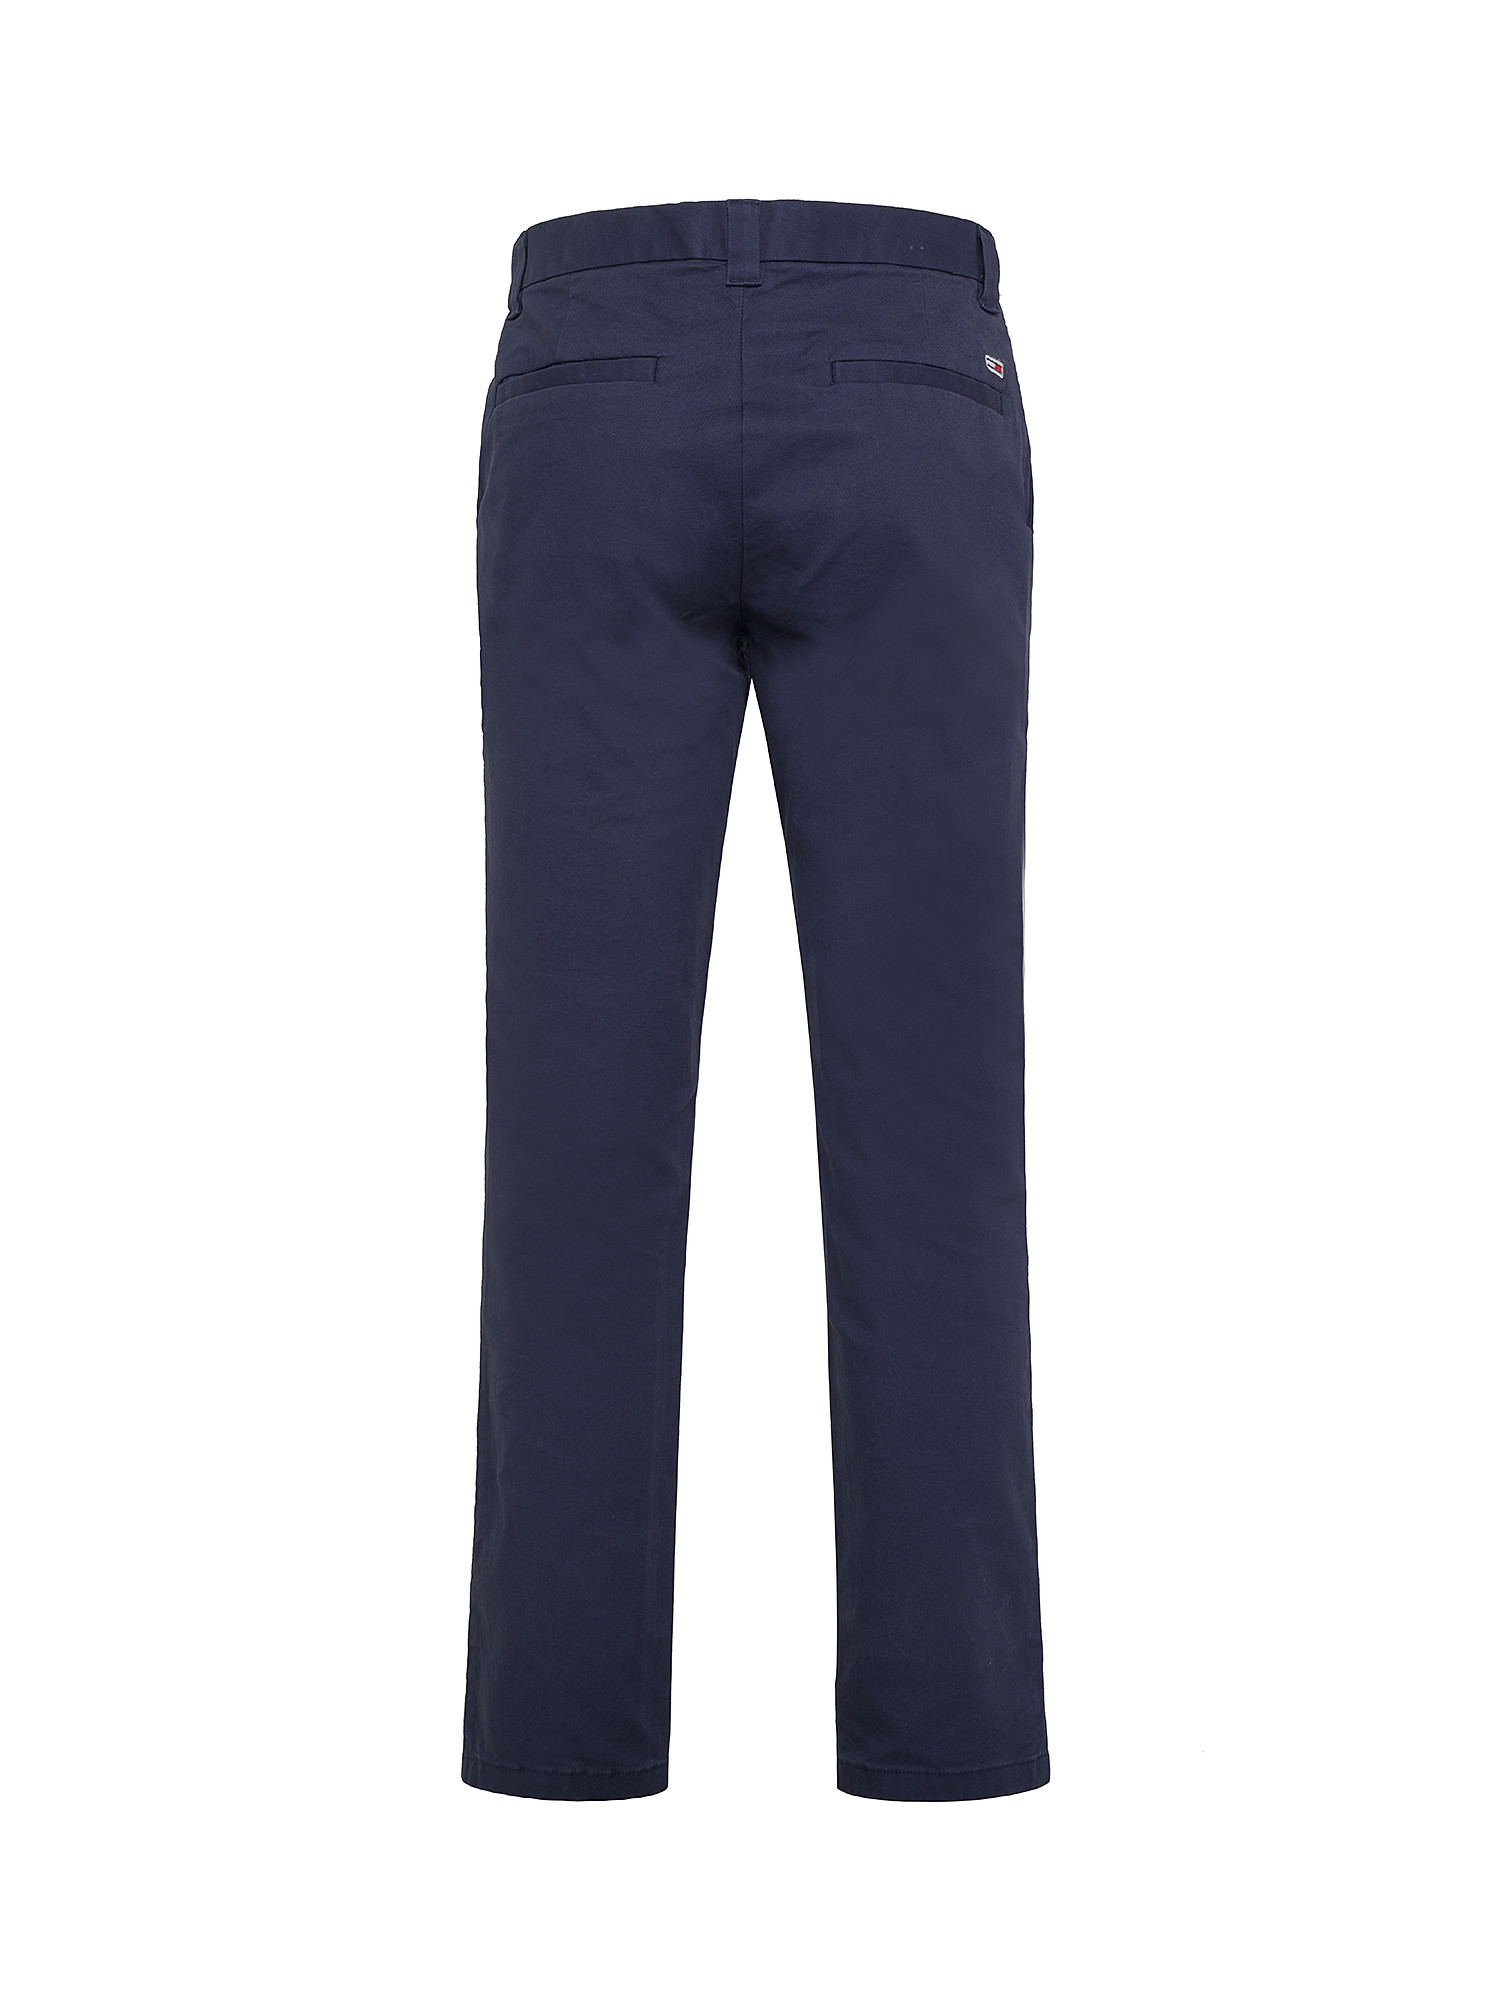 Tommy Jeans - Pantaloni chino slim fit, Blu scuro, large image number 1